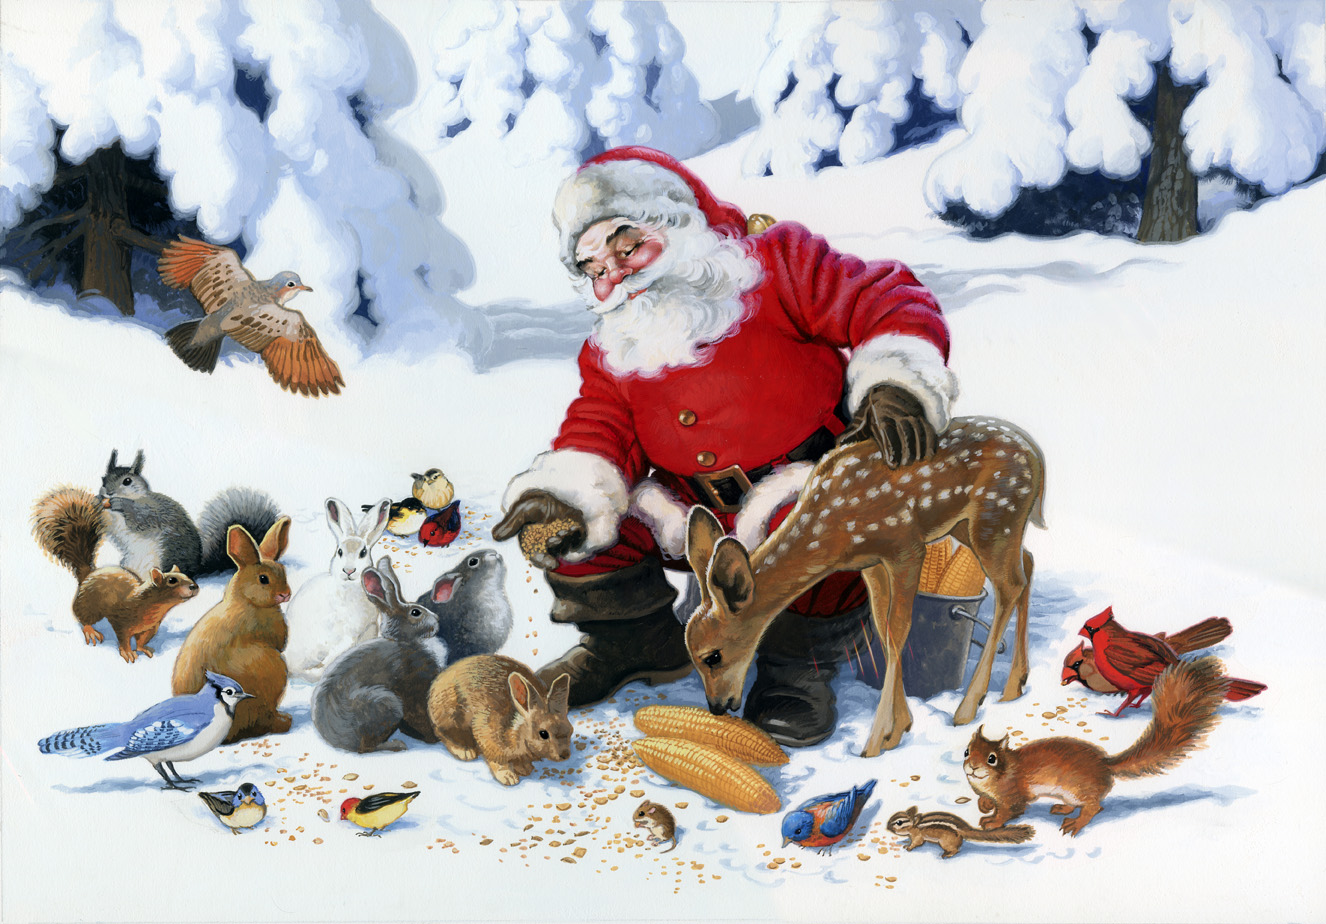 Santa is friends will all the woodland creatures.